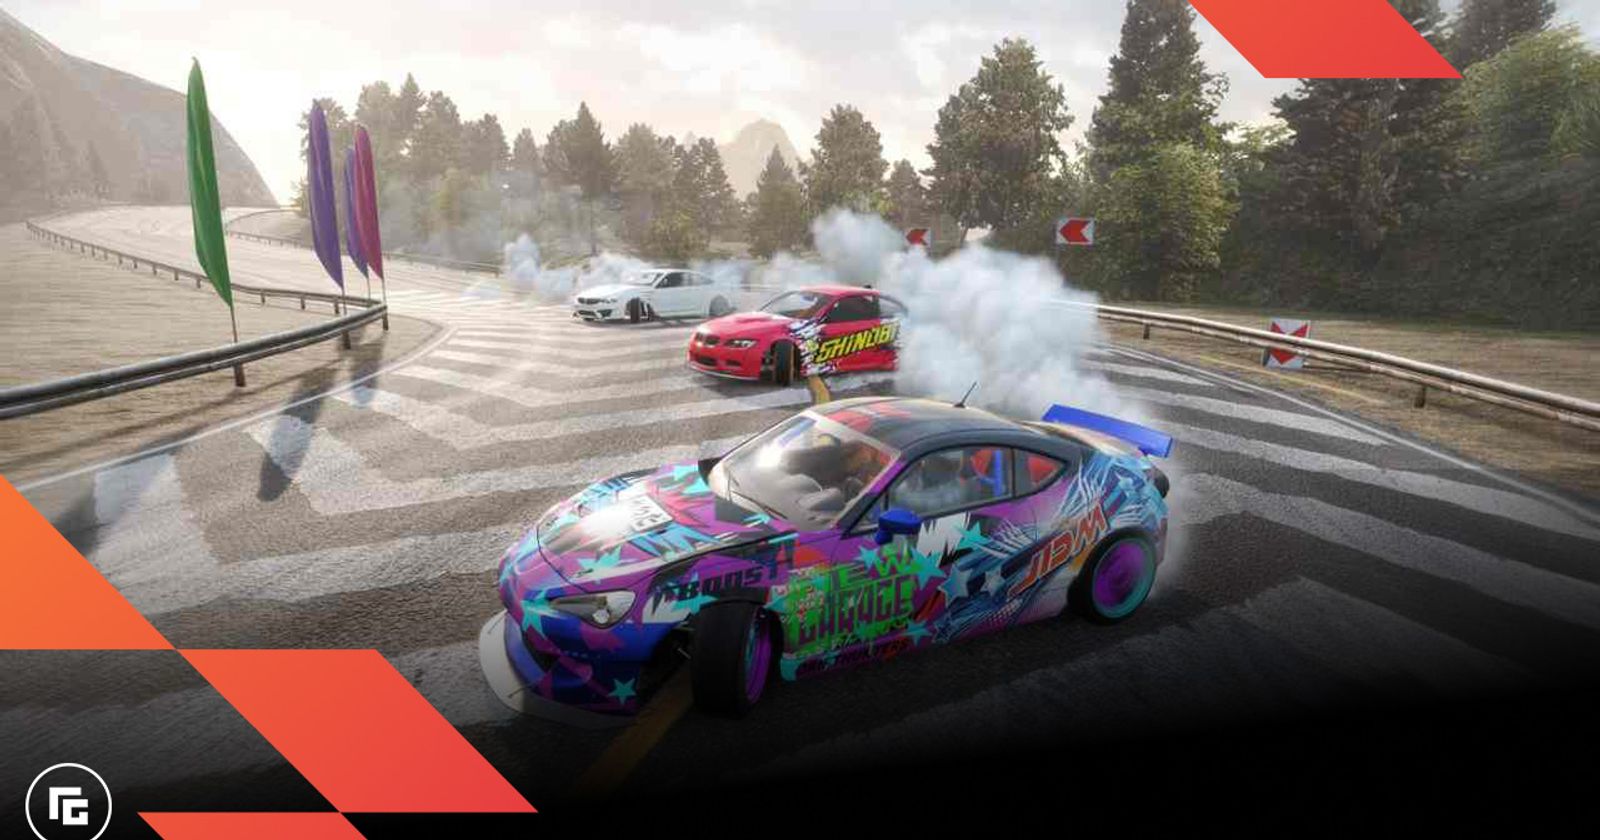 CarX Drift Racing Online Price: How much does it cost on PC, PS4, Xbox One  & mobile?